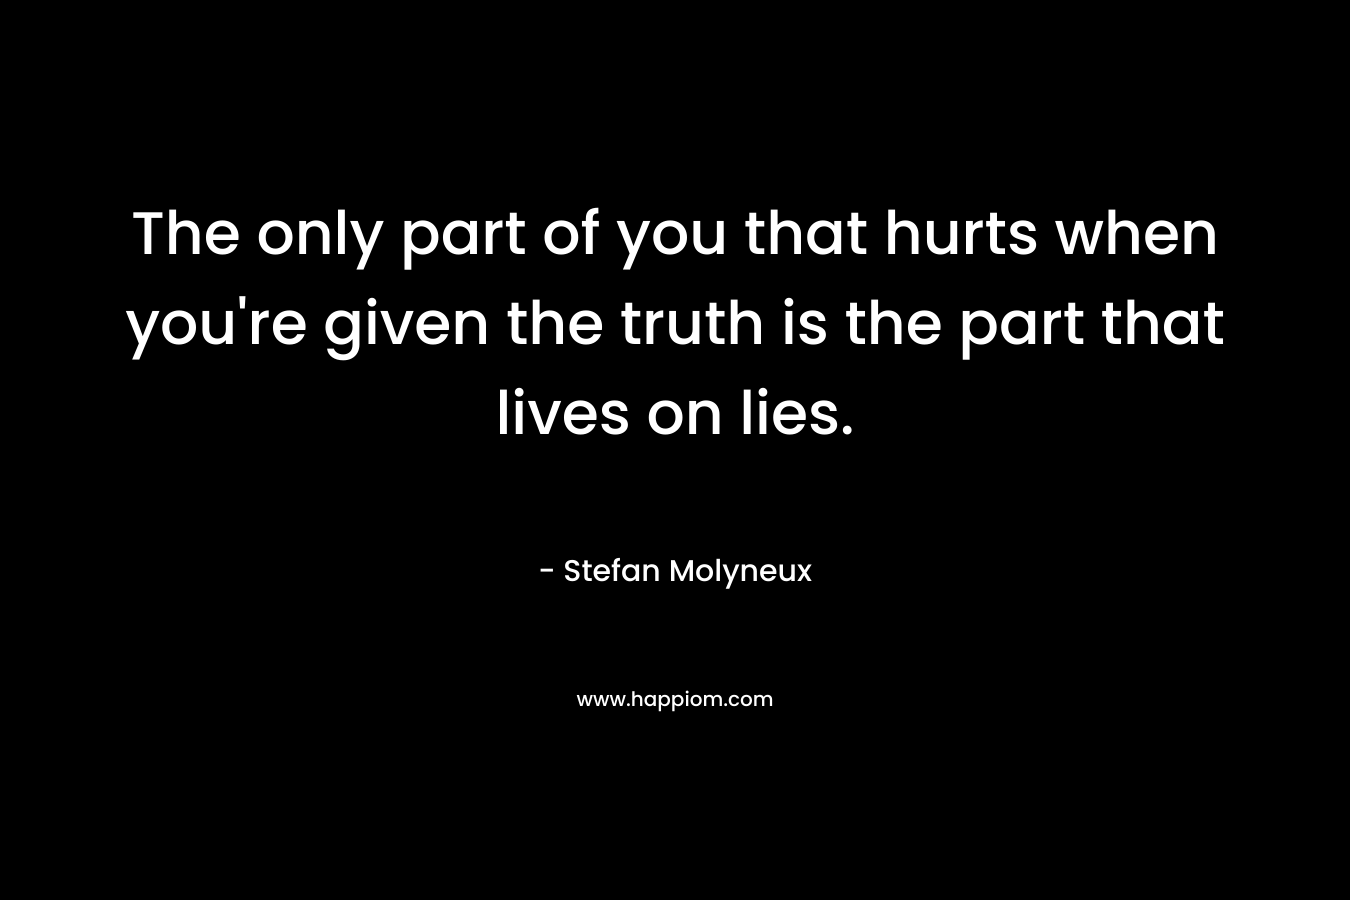 The only part of you that hurts when you're given the truth is the part that lives on lies.